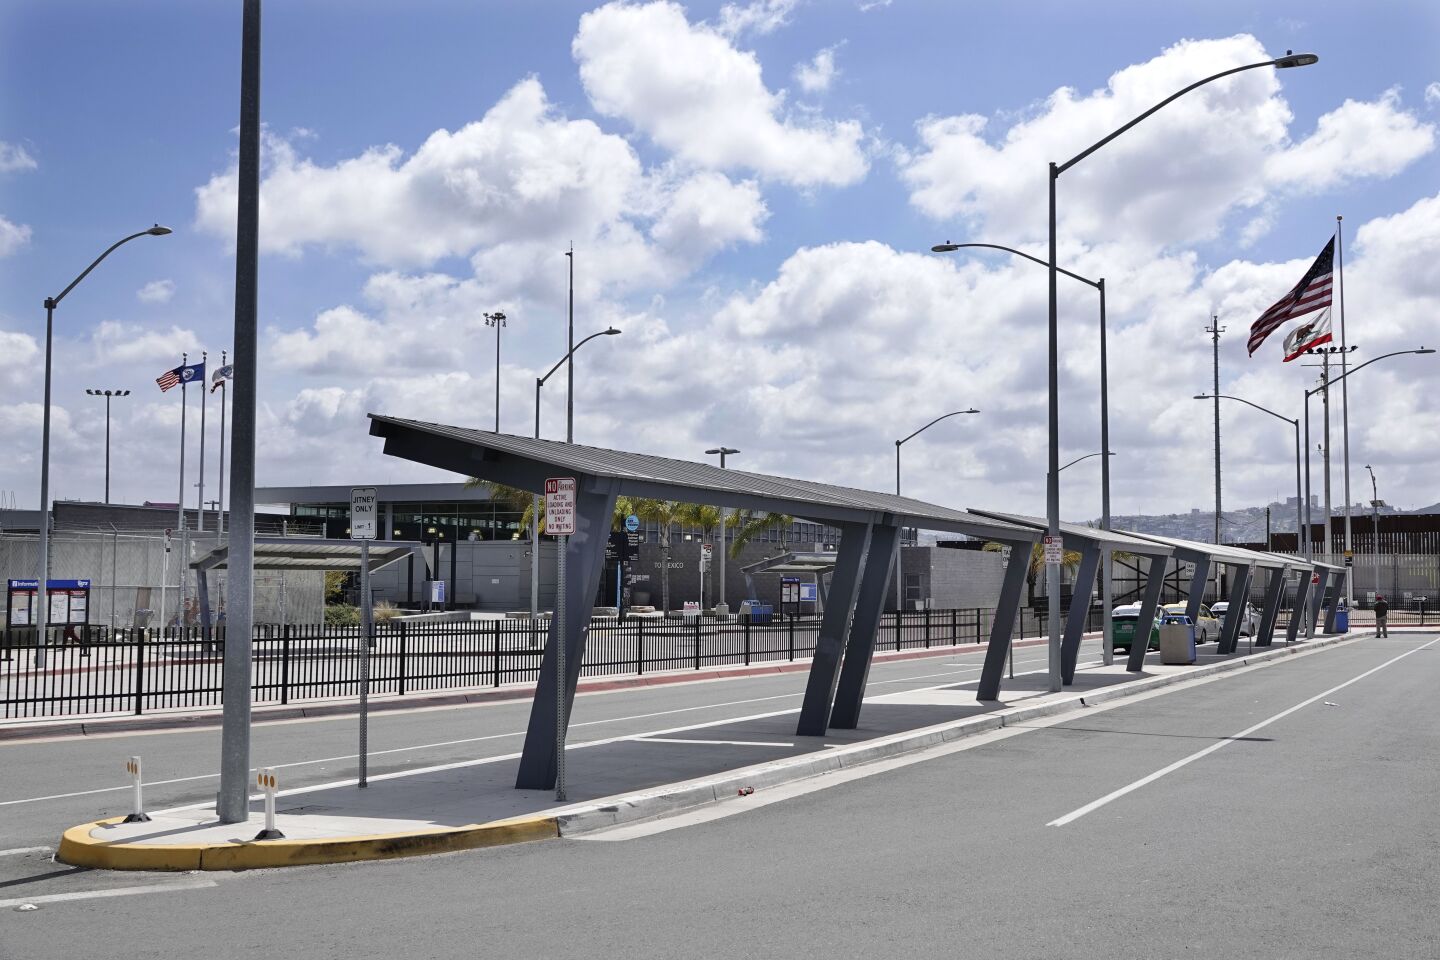 The San Ysidro Land Port of Entry - West Pedestrian Facility, one of the busiest land border crossings in the world, is quiet on March 29, 2020.